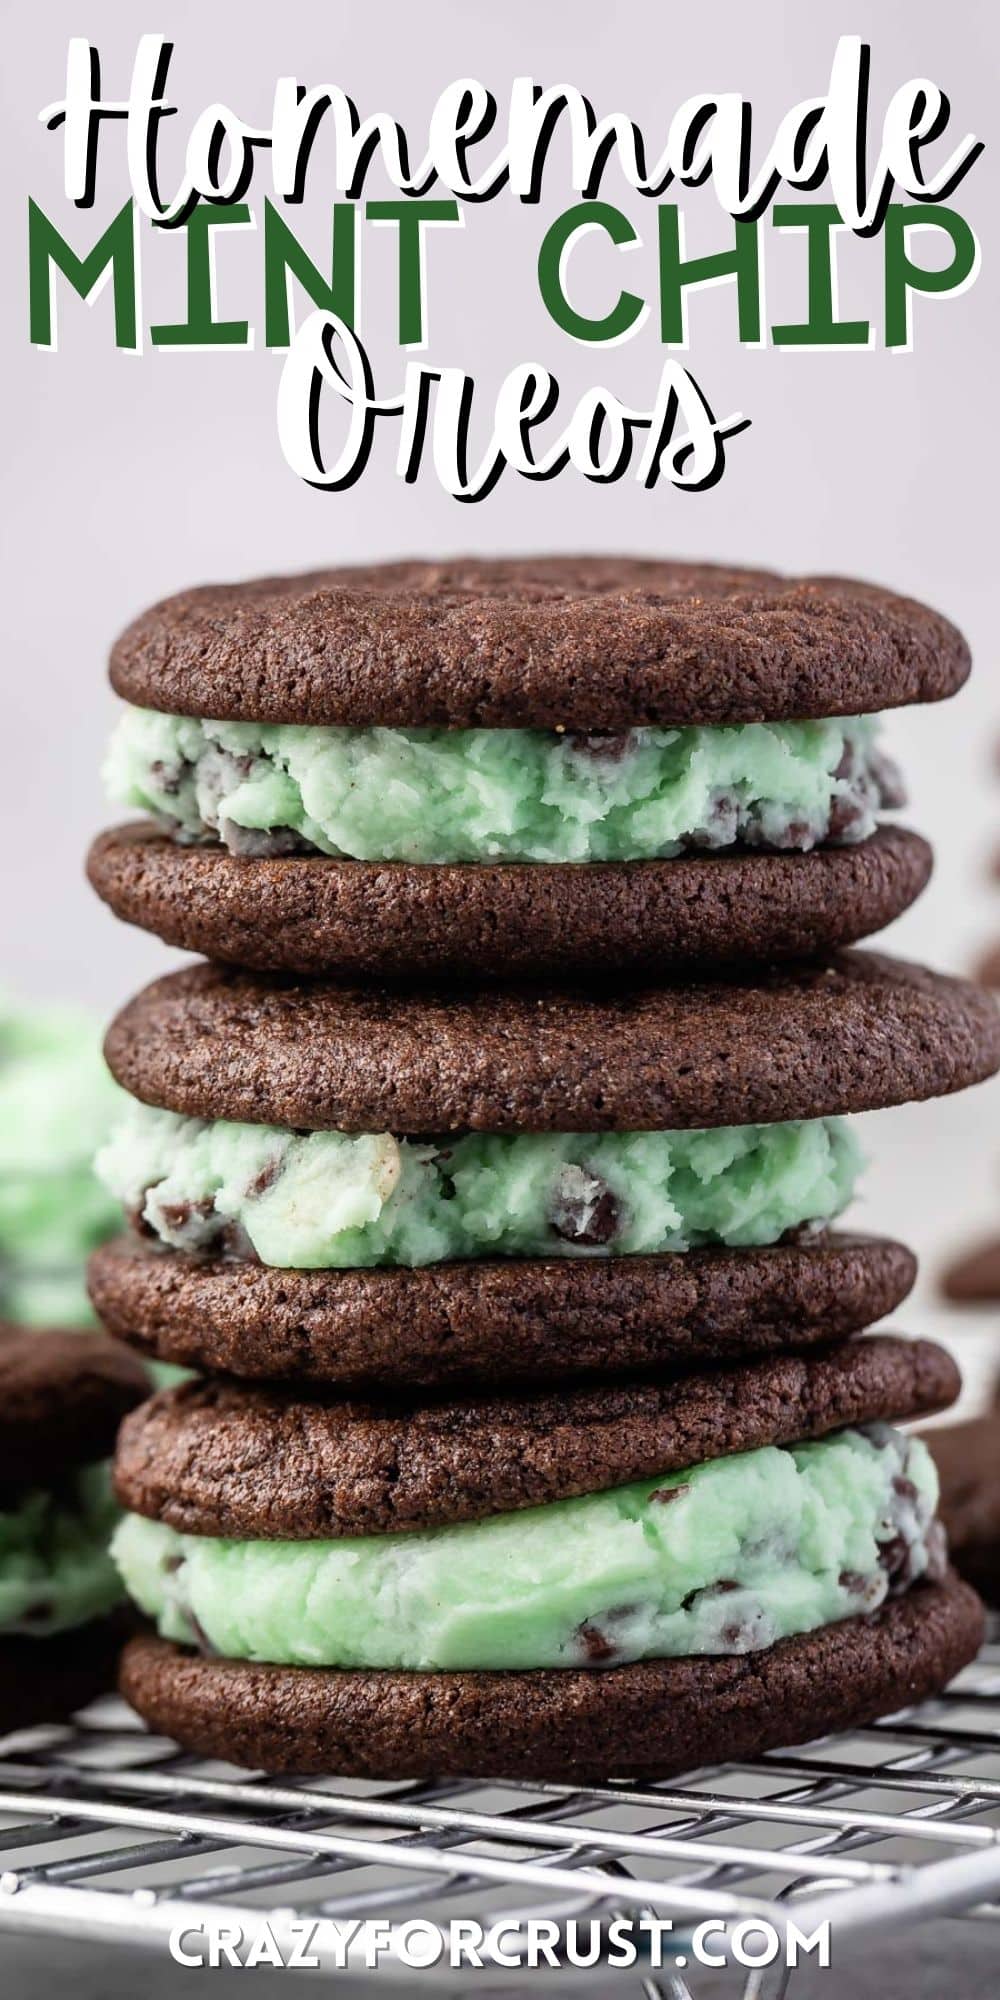 stacked mint chip oreos with green filling with words on the image.